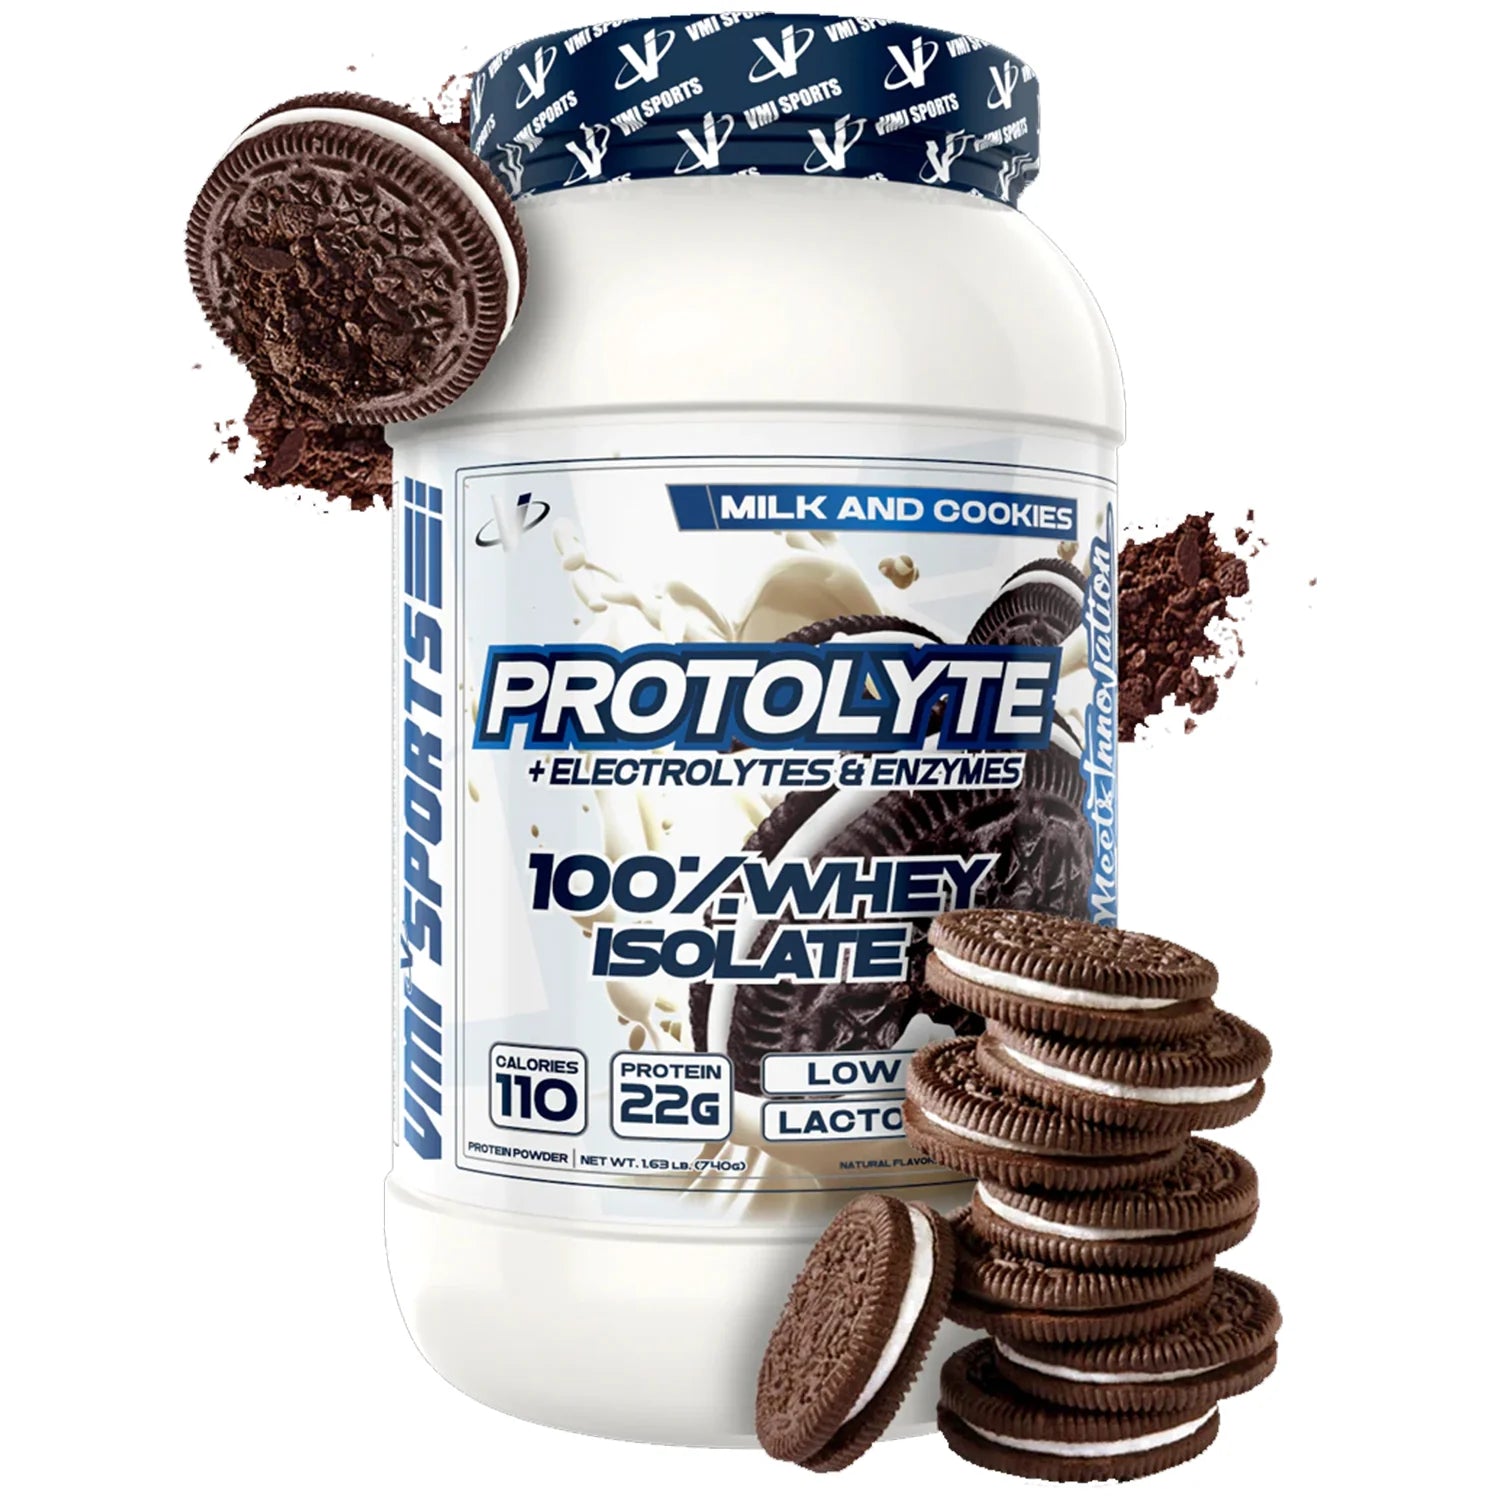 VMI Protolyte Protein 25 Servings (Milk and Cookies)